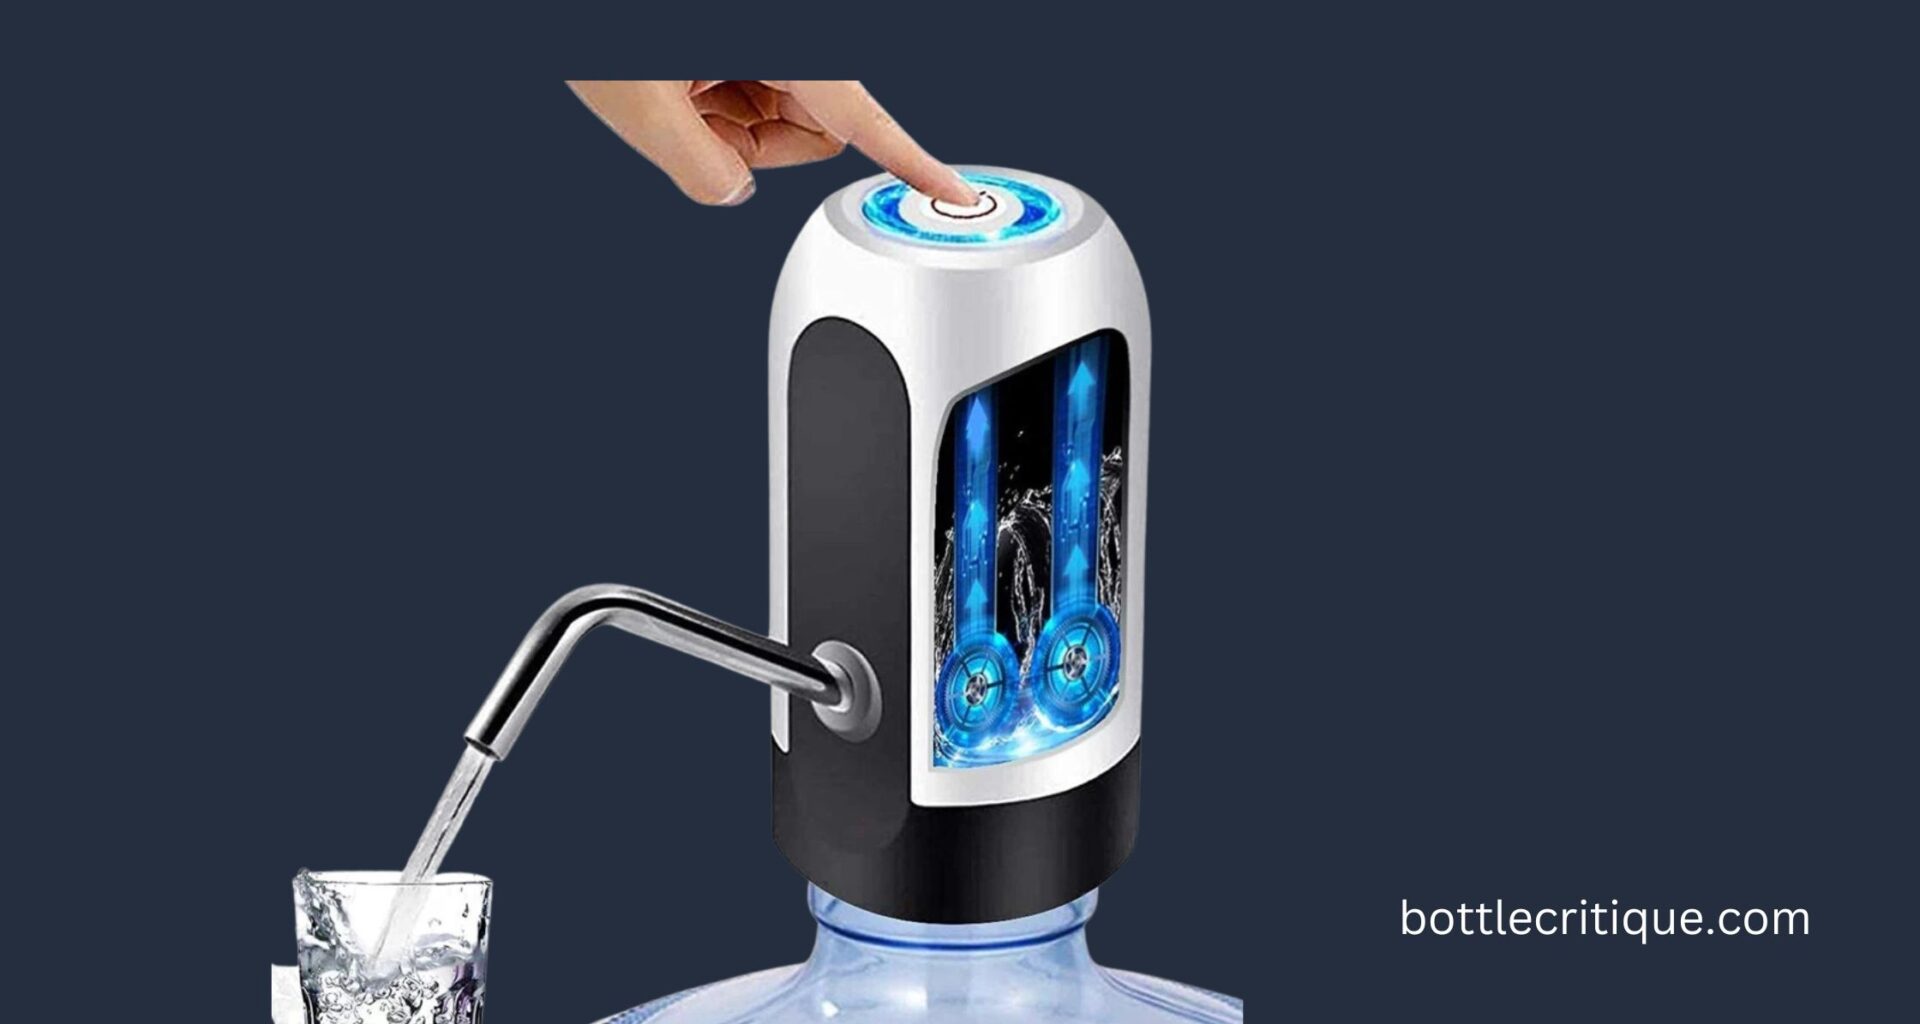 How to Put Water Bottle on Dispenser Without Spilling?